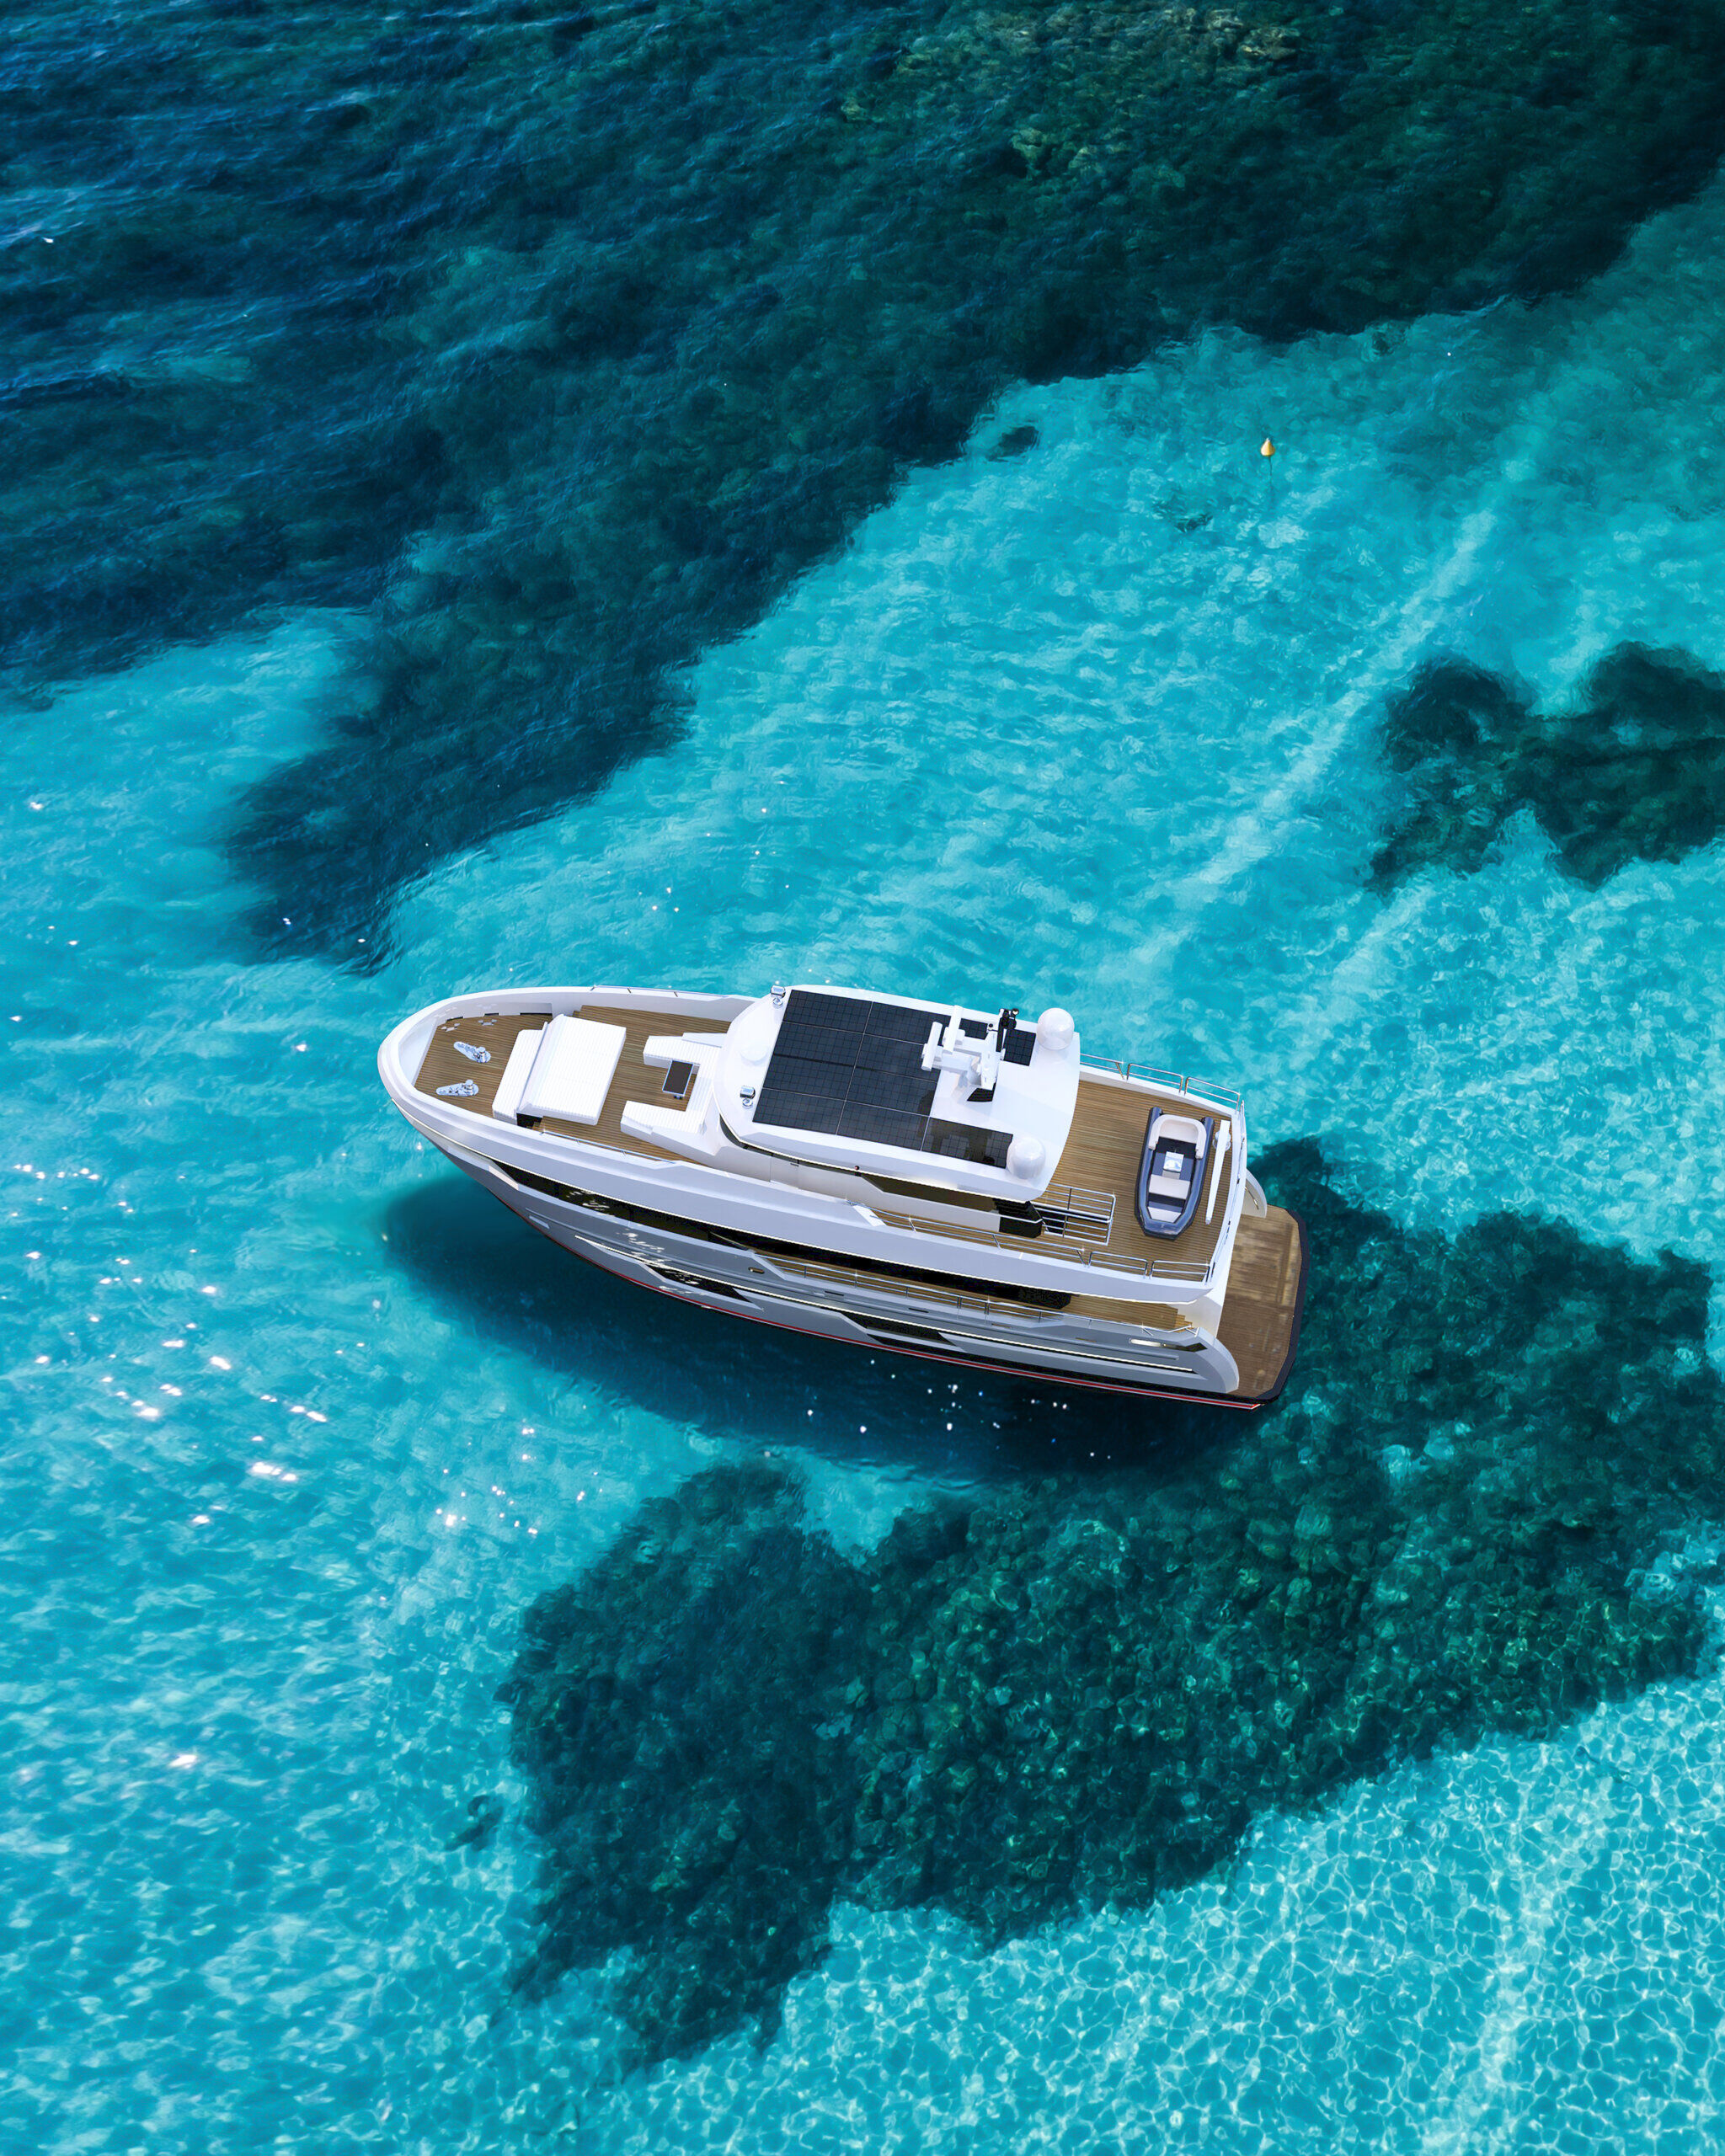 From Antalya to Cyprus in January | Bering 78 Shallow Draft Explorer